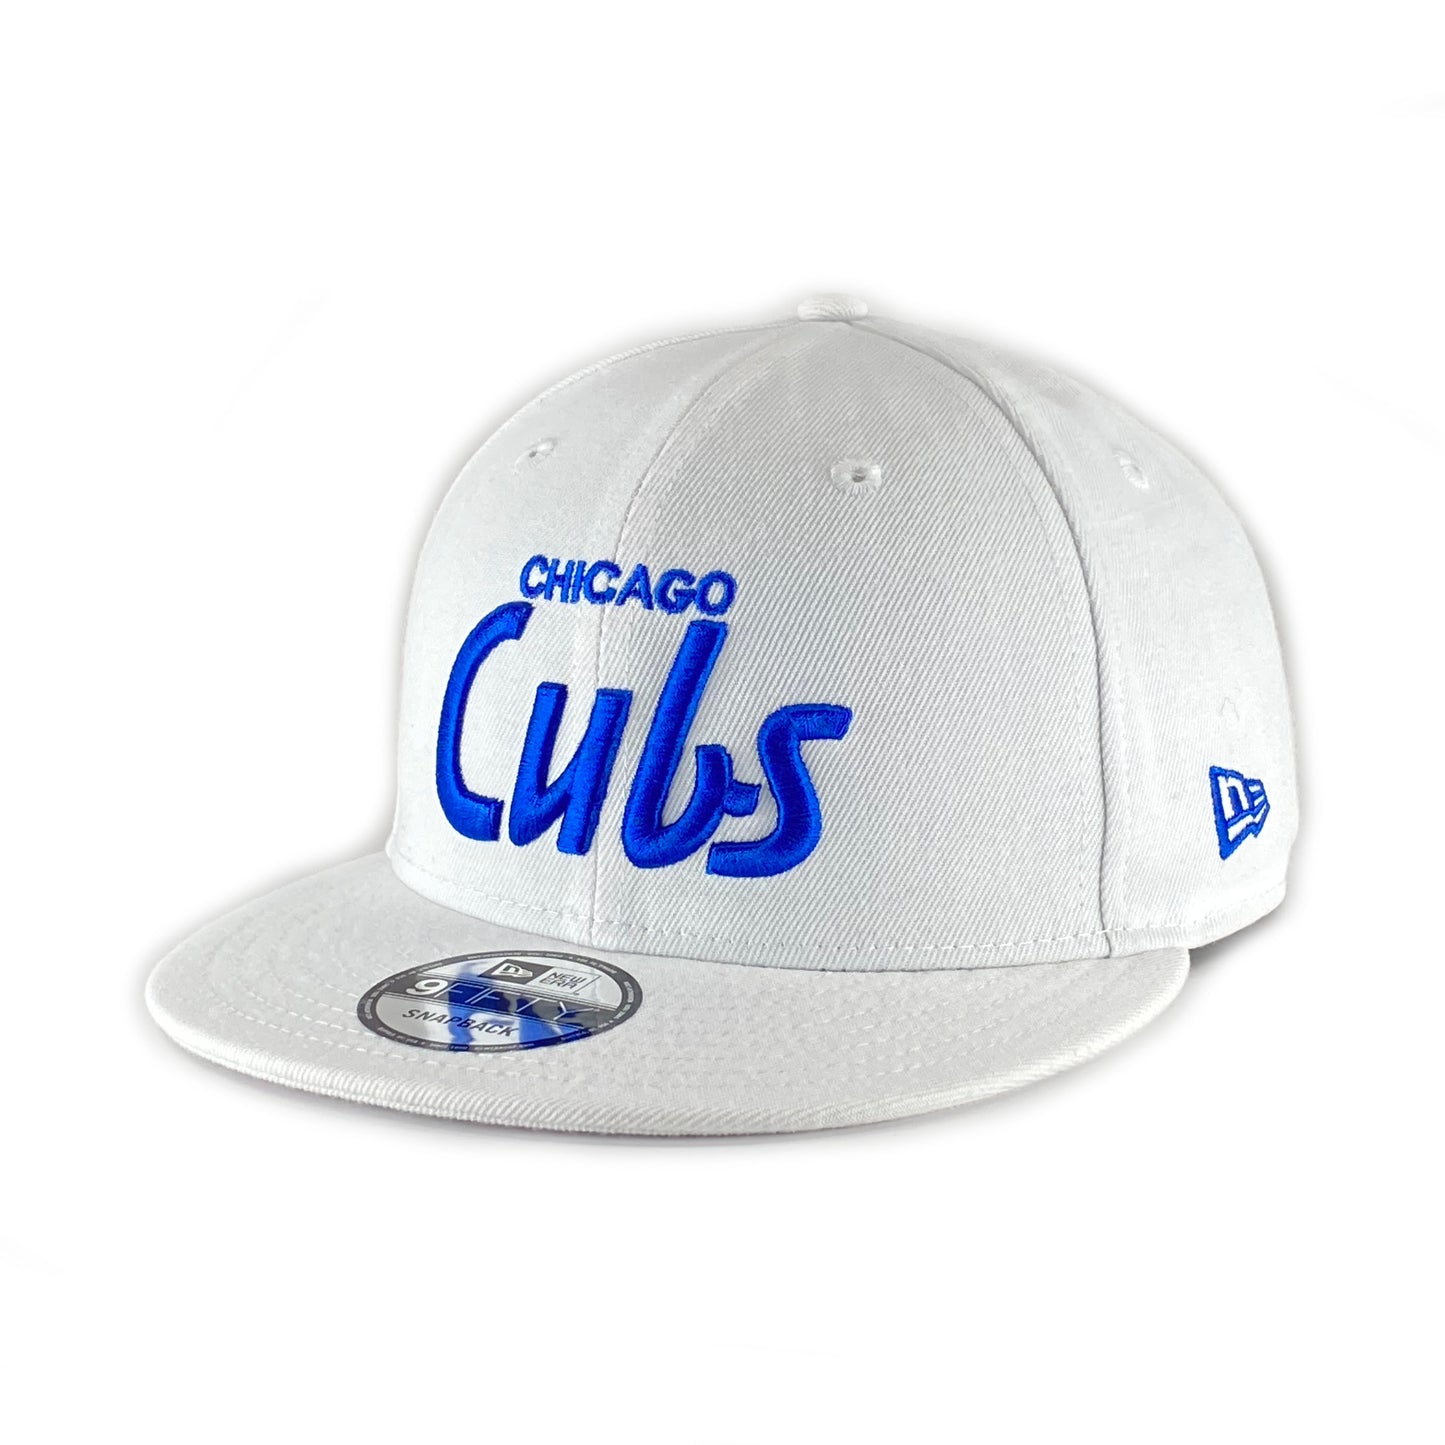 Chicago Cubs Chase White Script 9FIFTY Snapback